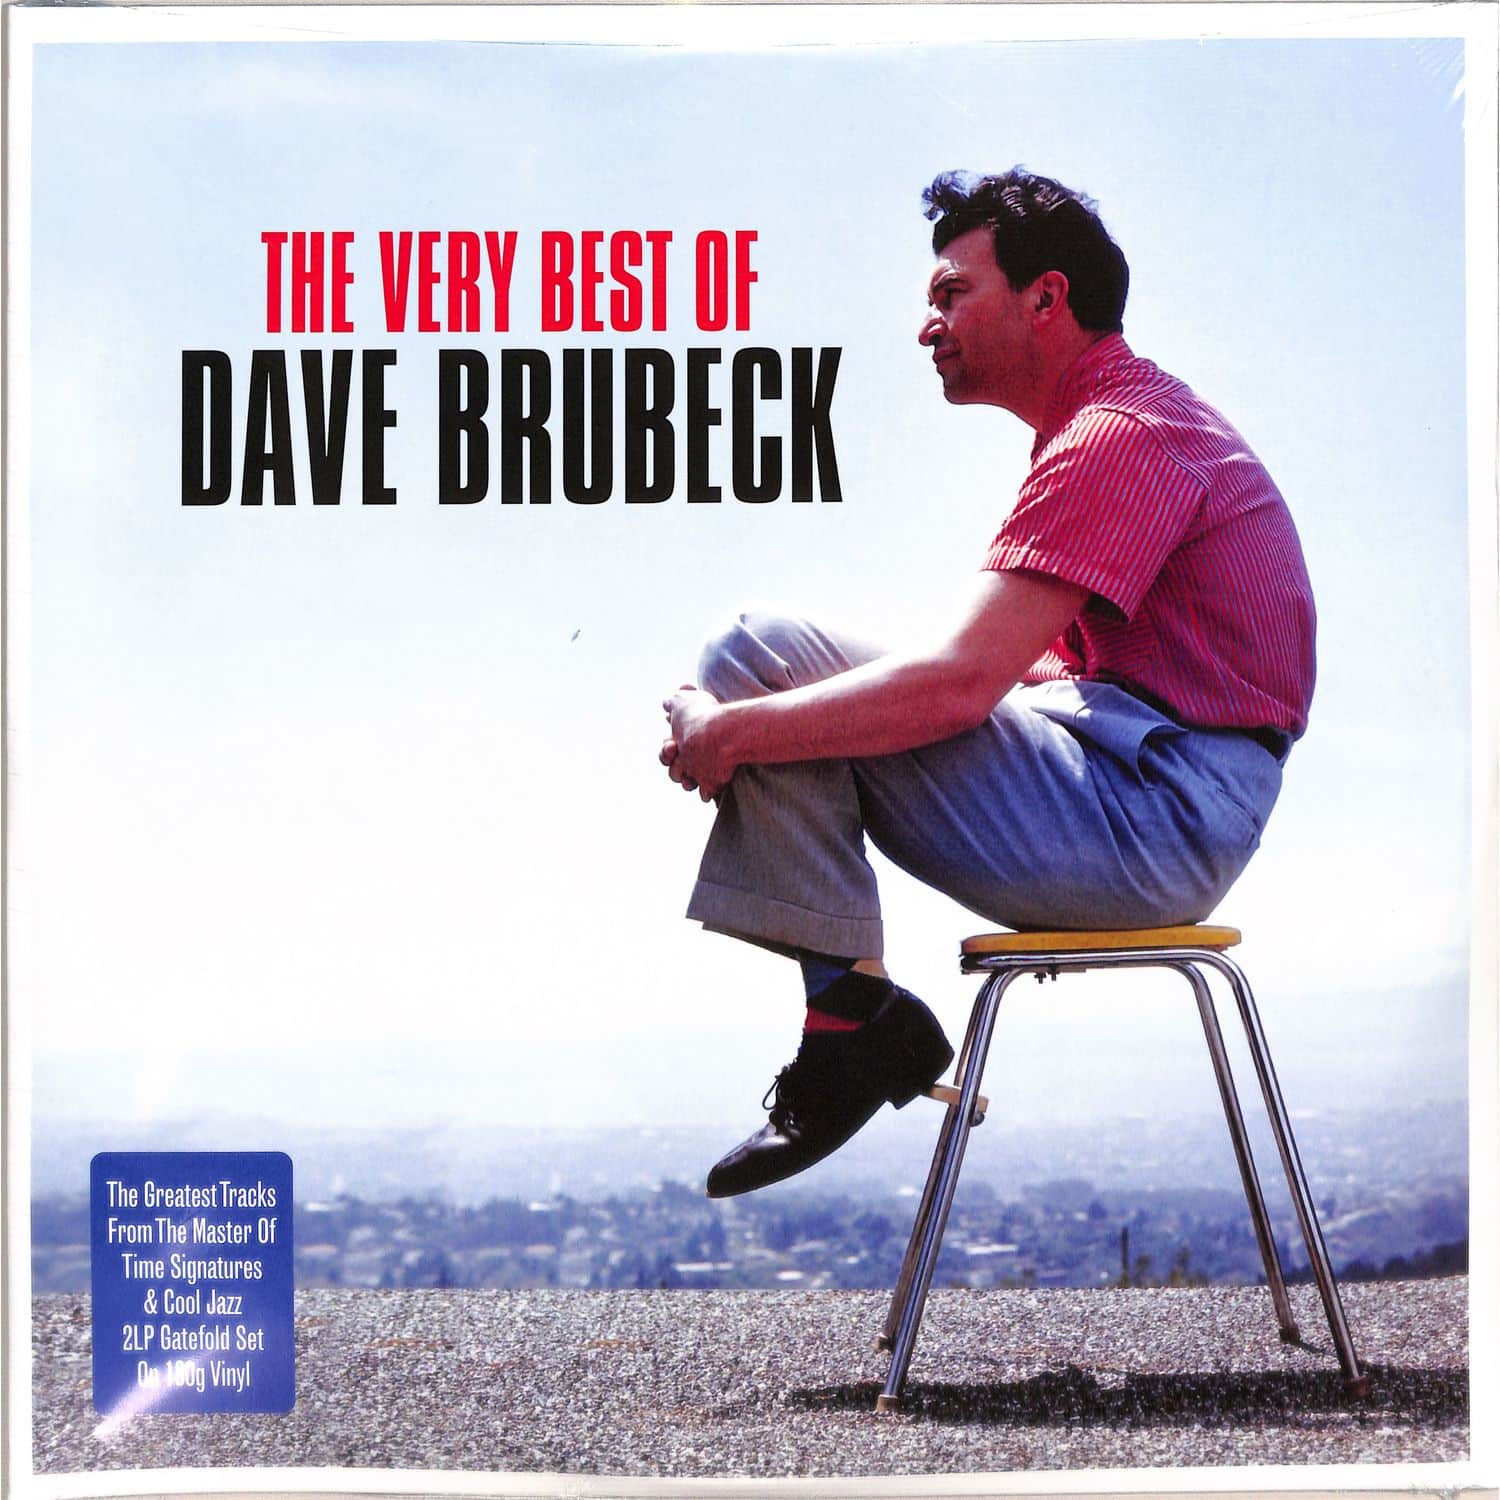 Dave Brubeck - THE VERY BEST OF 